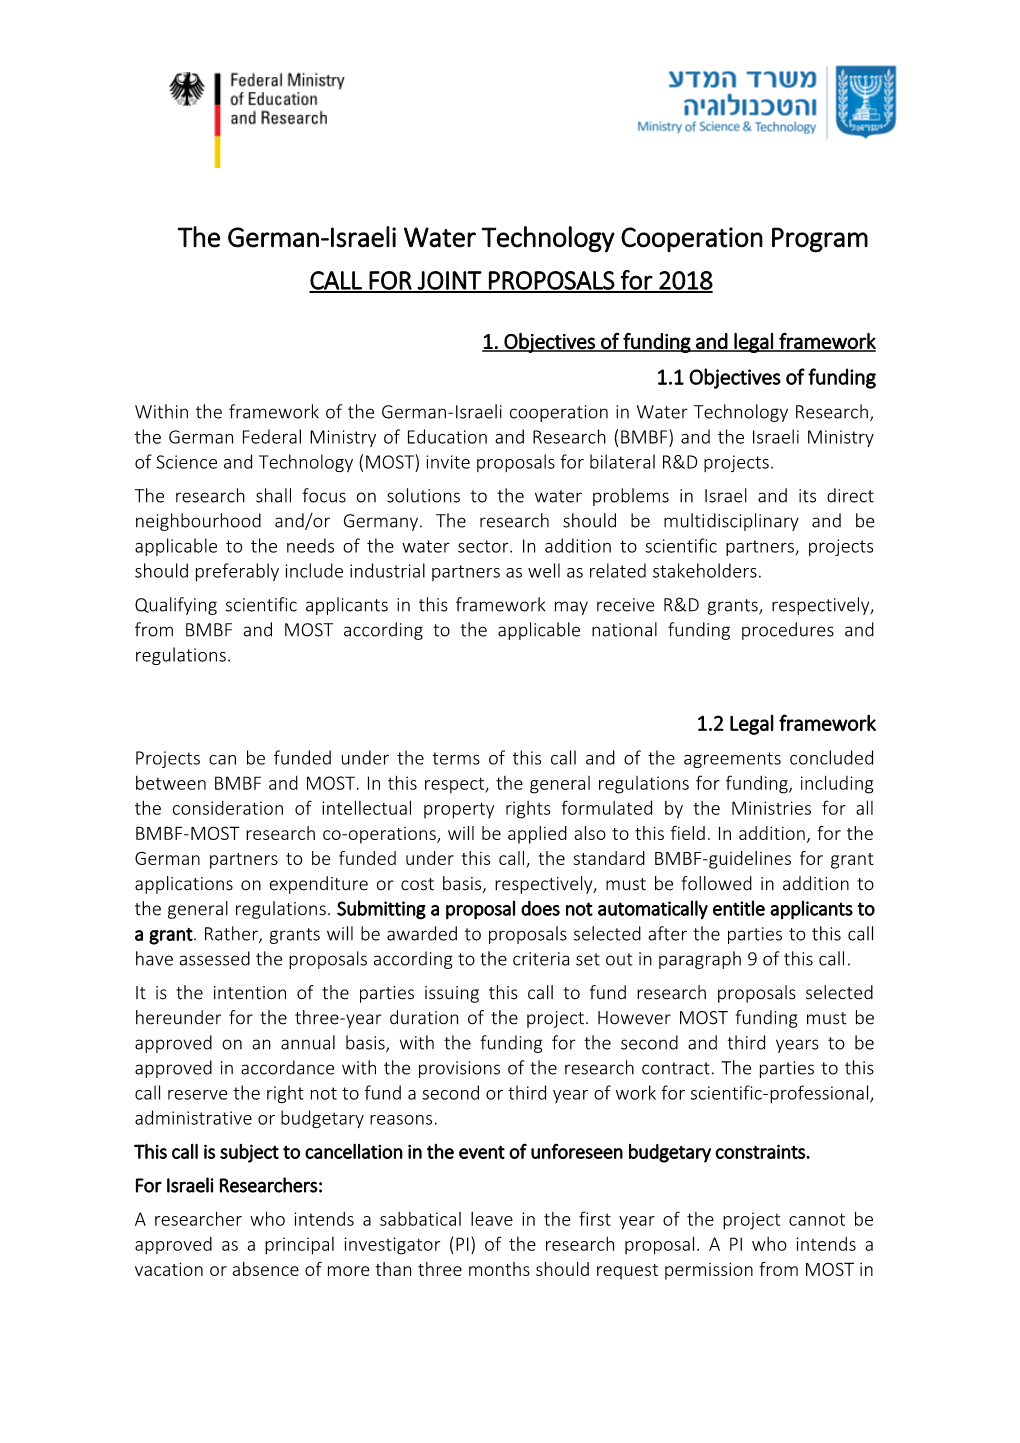 ISR-GER - Call for Proposals Watech 2017 - FINAL